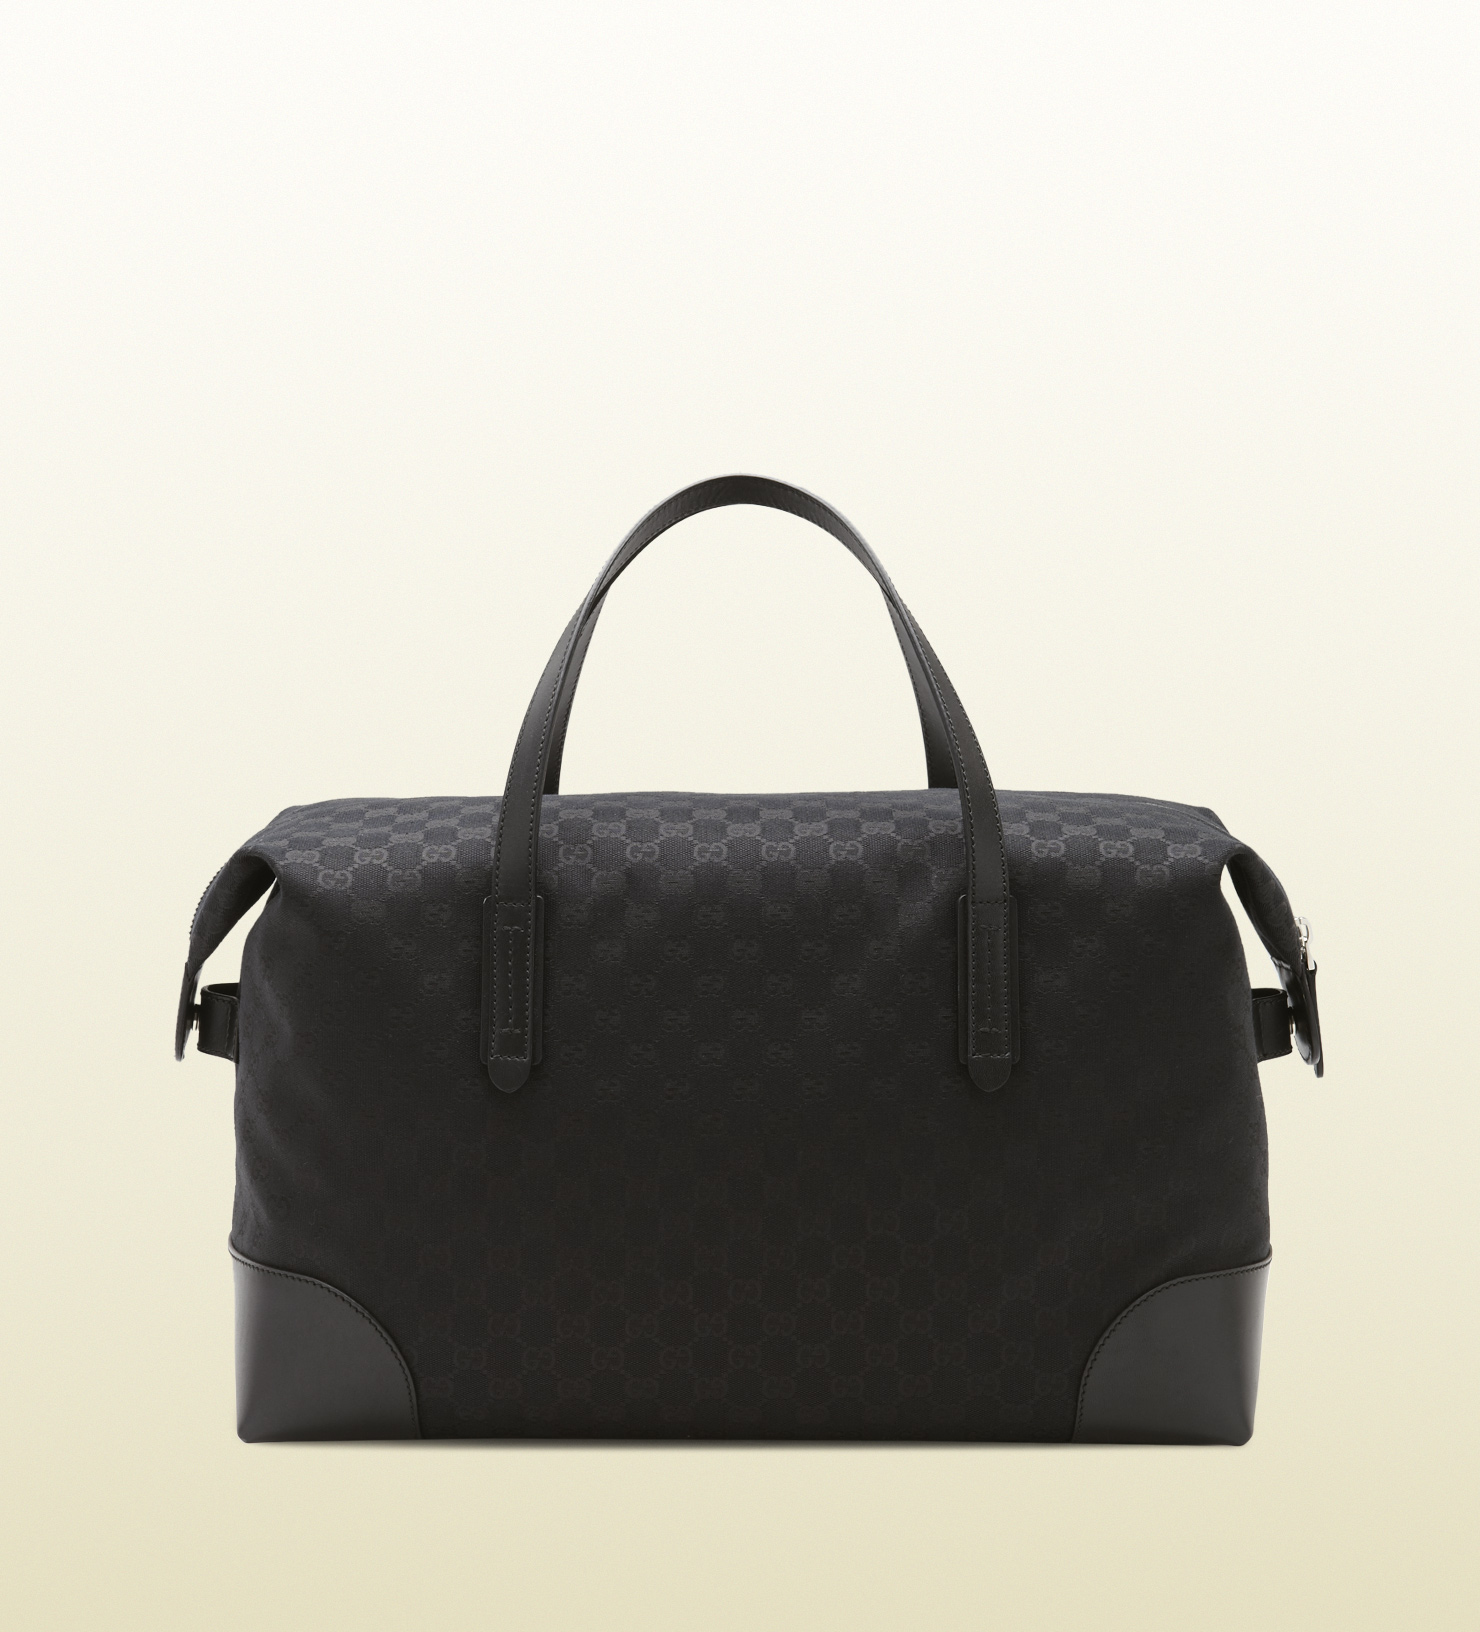 Lyst - Gucci Original Gg Canvas Carry-on Duffel Bag in Black for Men